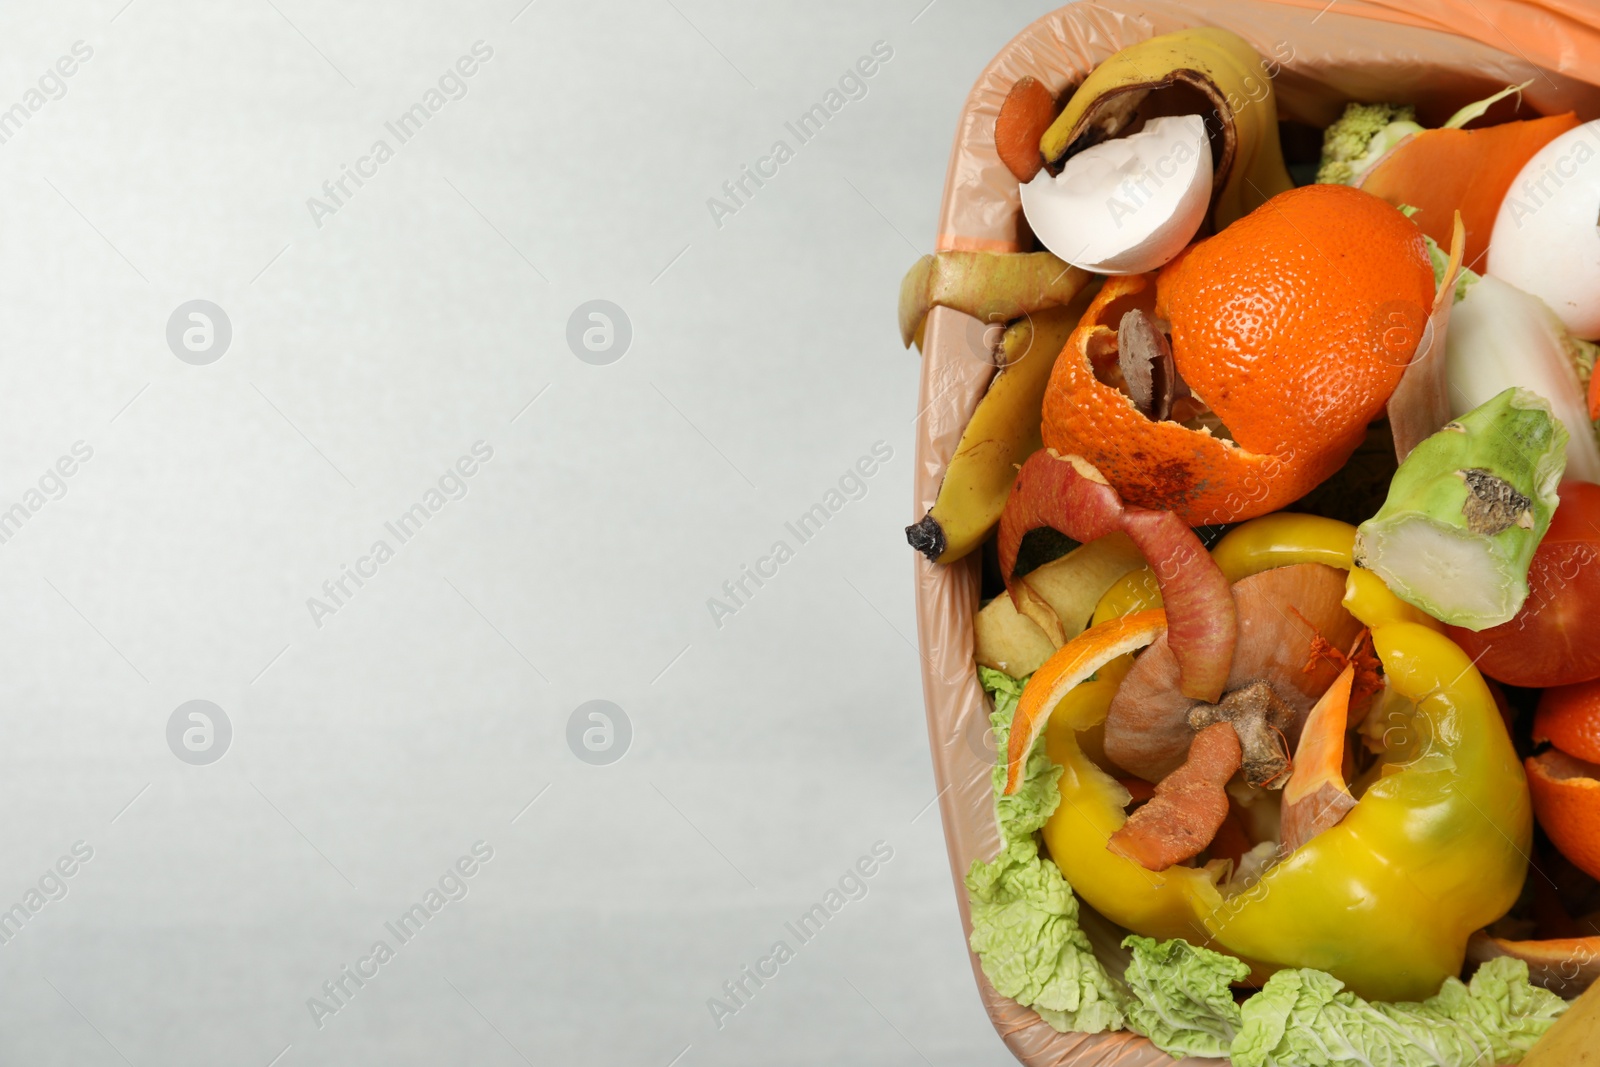 Photo of Natural garbage in trash bin on light background, top view with space for text. Composting of organic waste